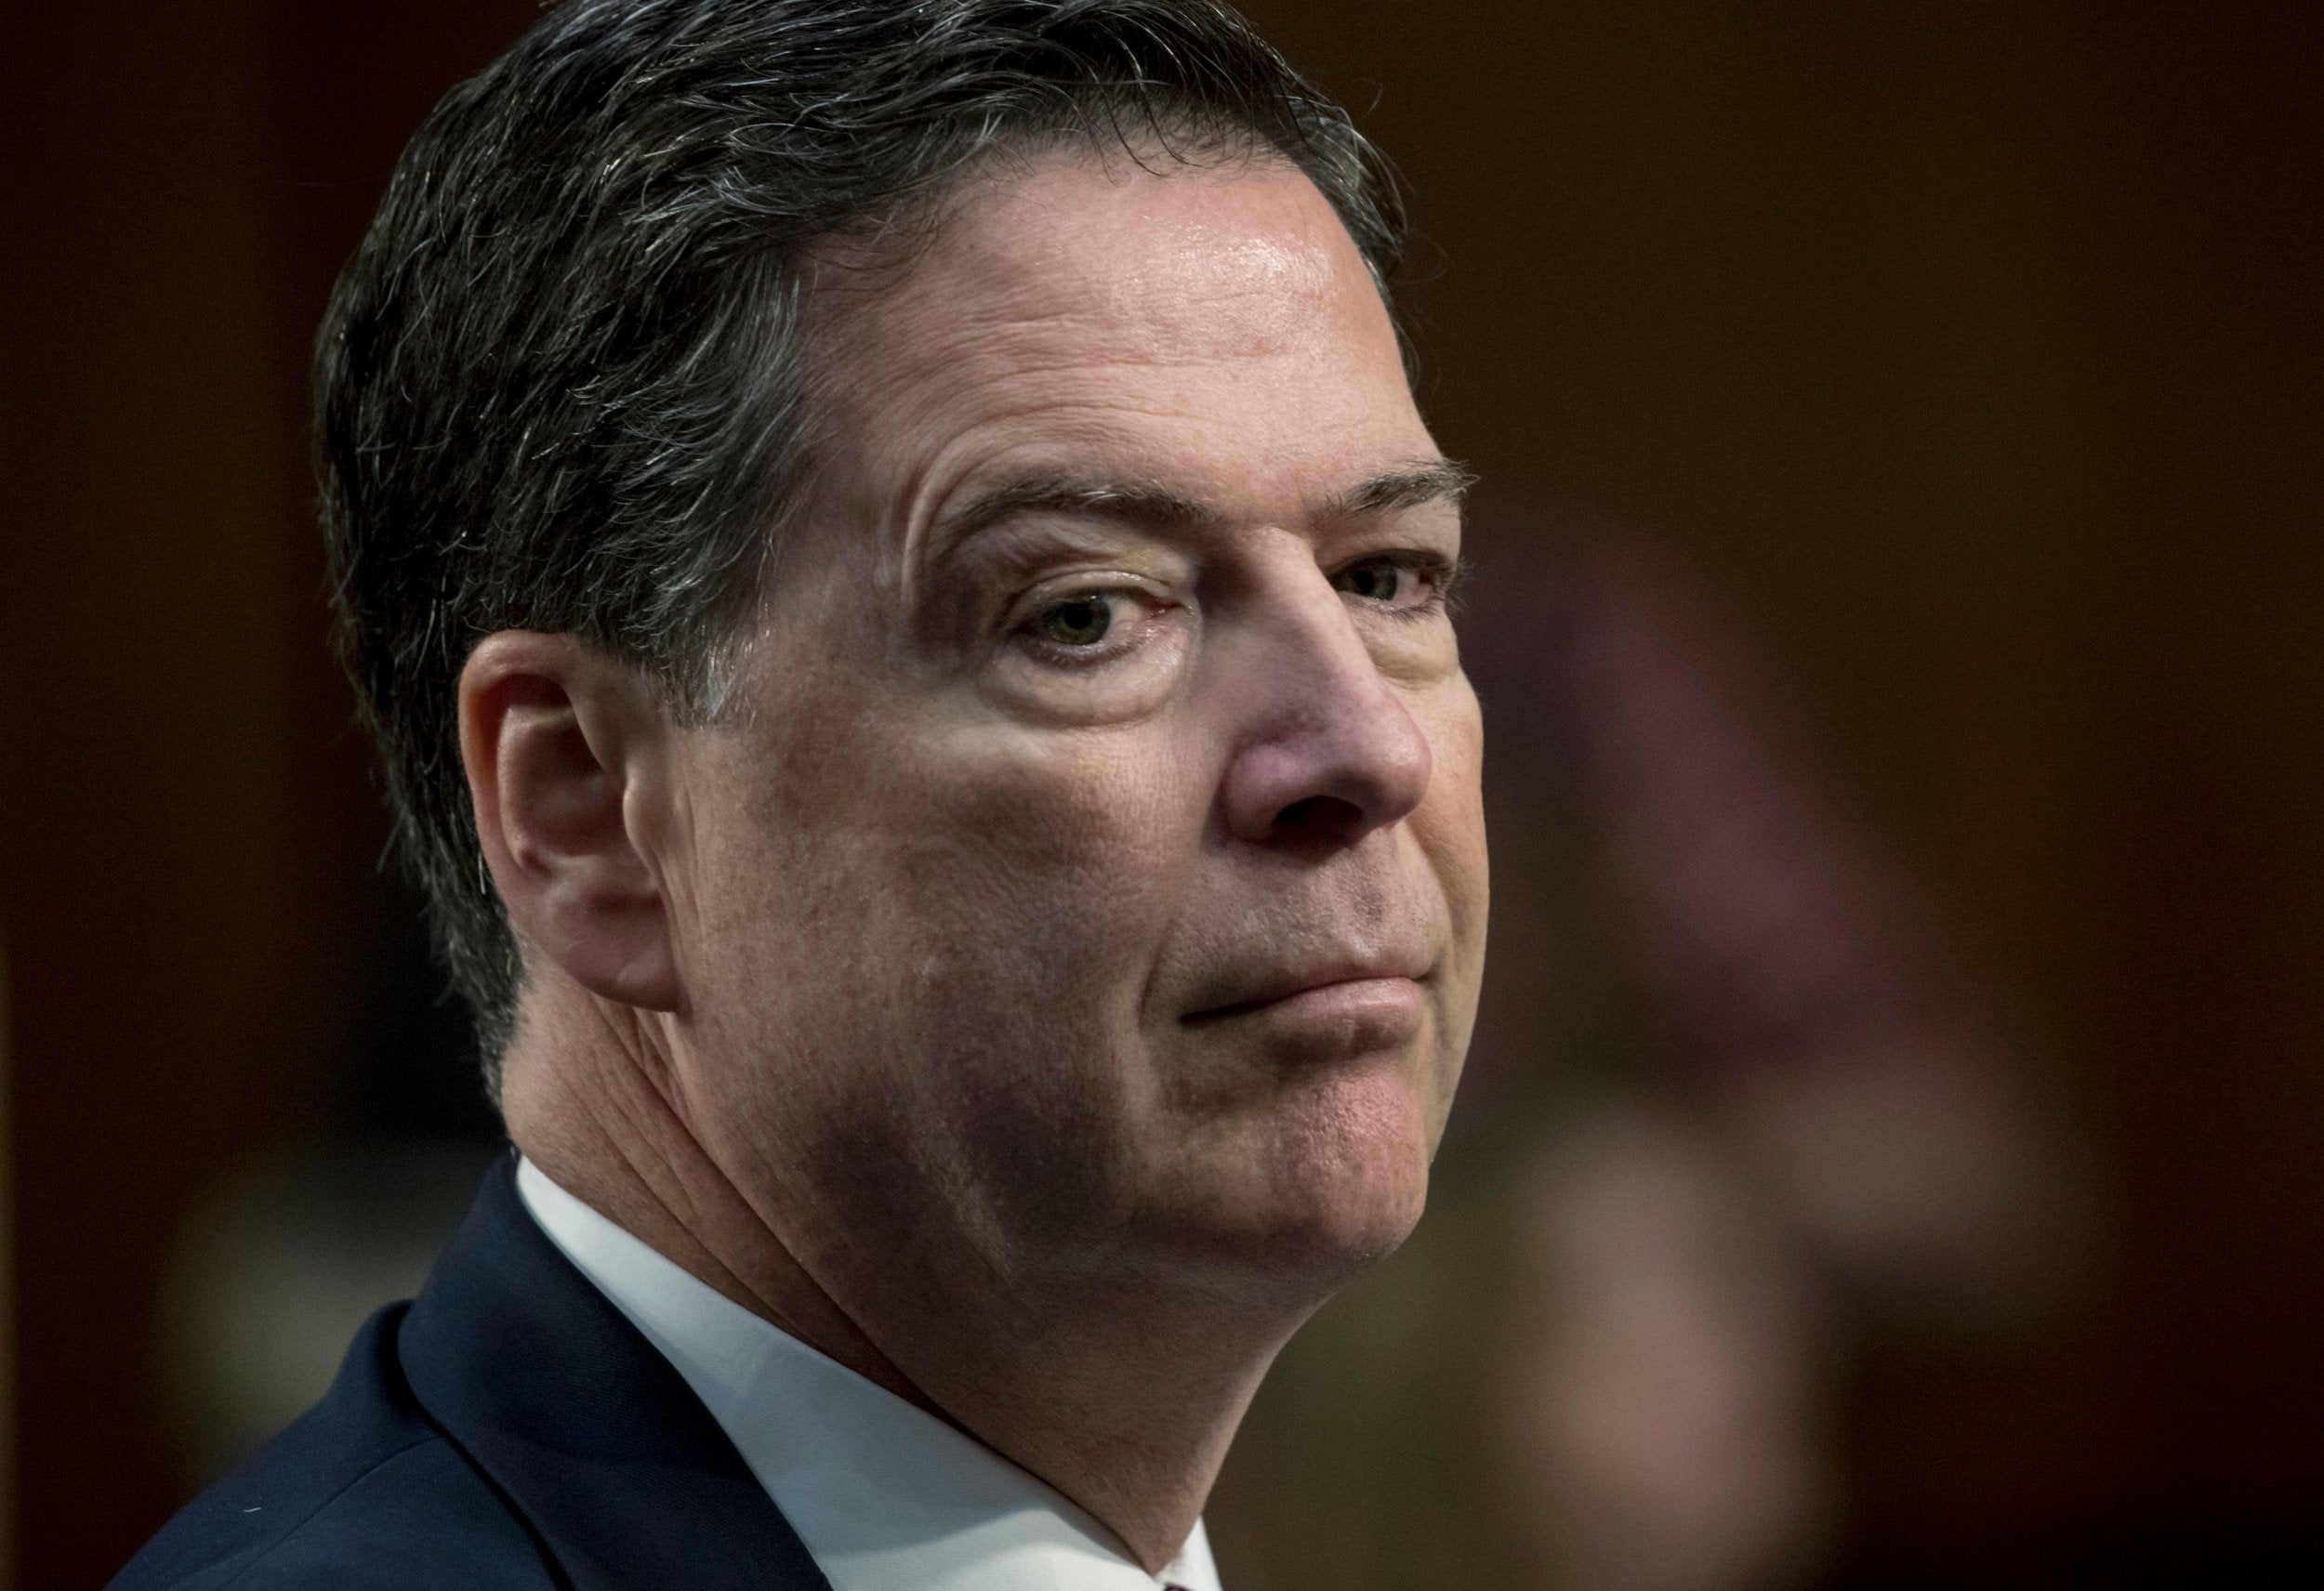 James Comey recently said he no longer considers himself a Republican